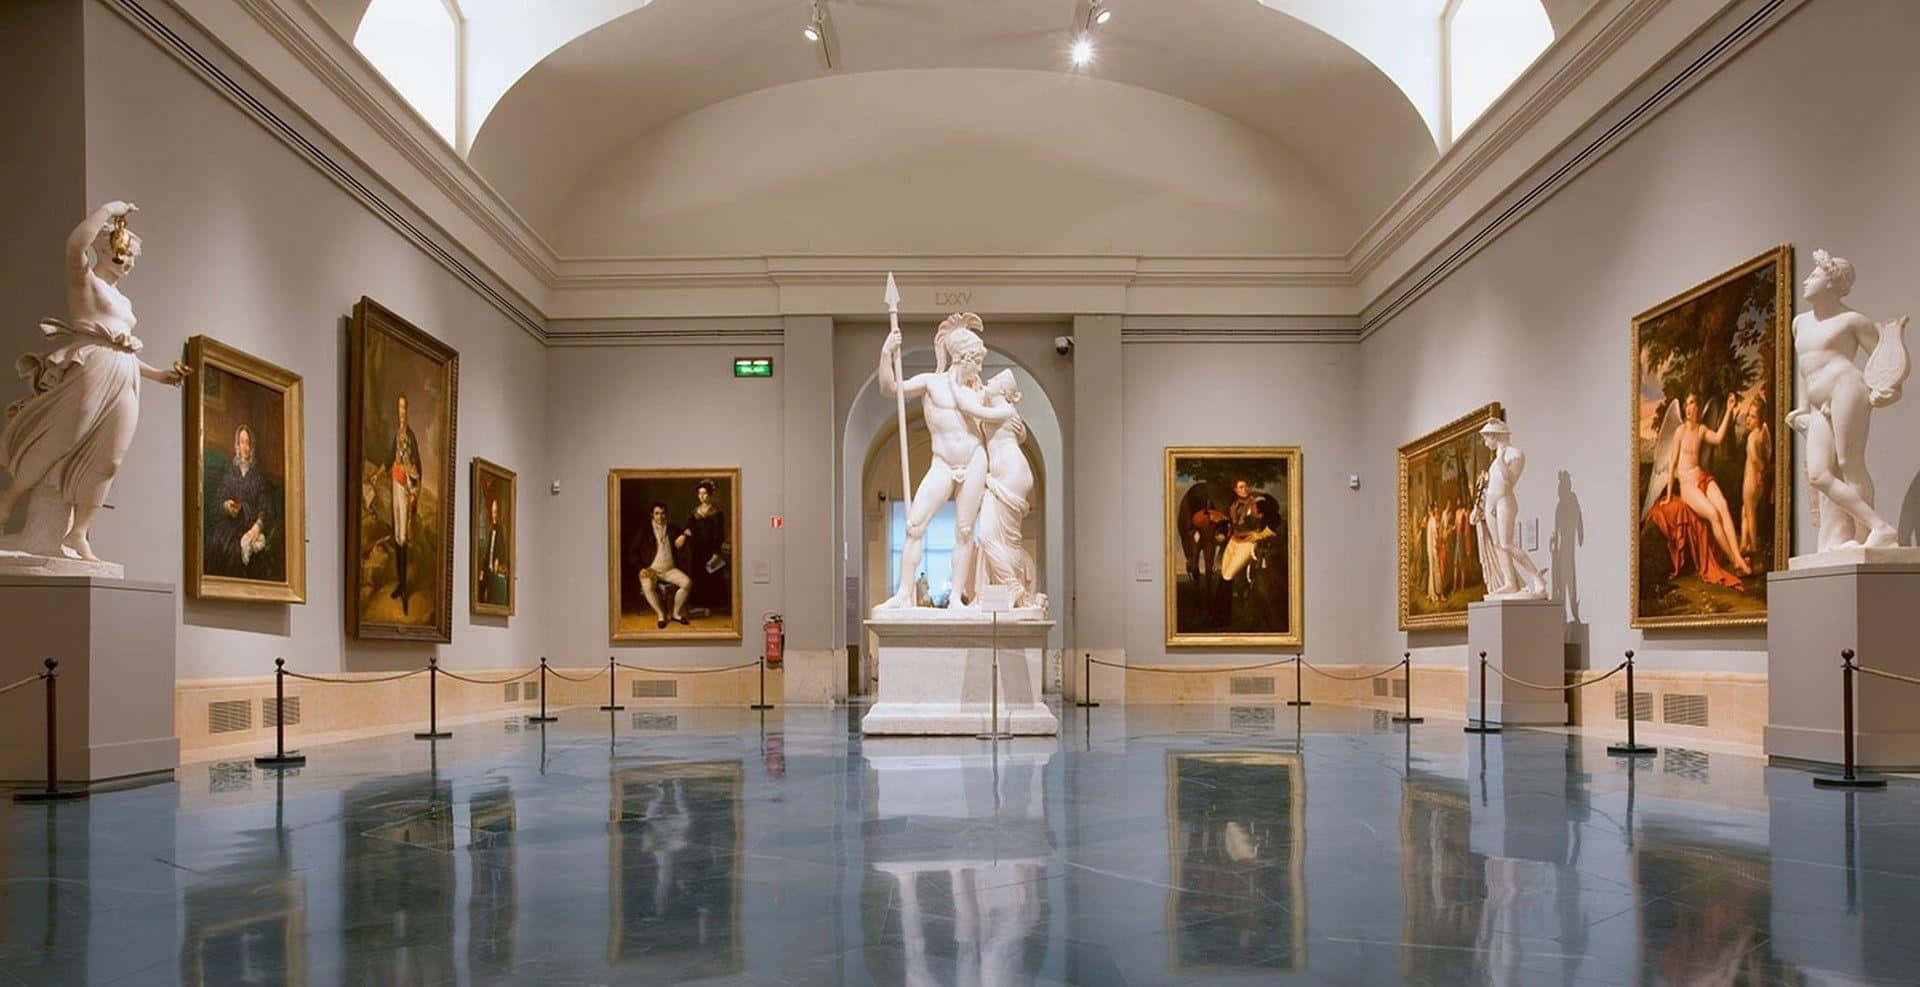 A Museum With Statues And Paintings On The Walls